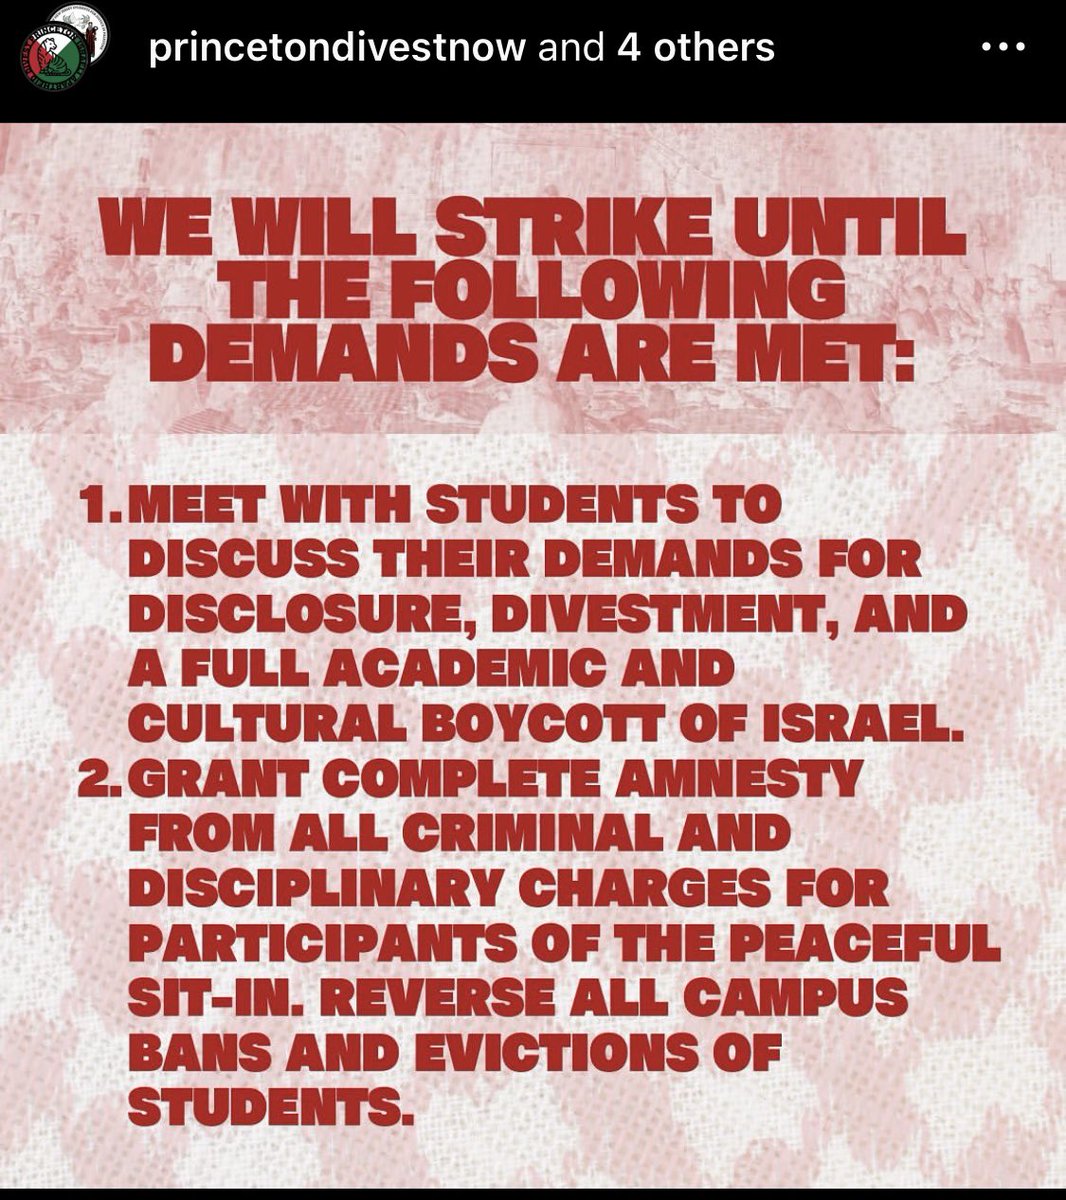 Princeton Israeli Apartheid Divest announces that students are launching a hunger strike.